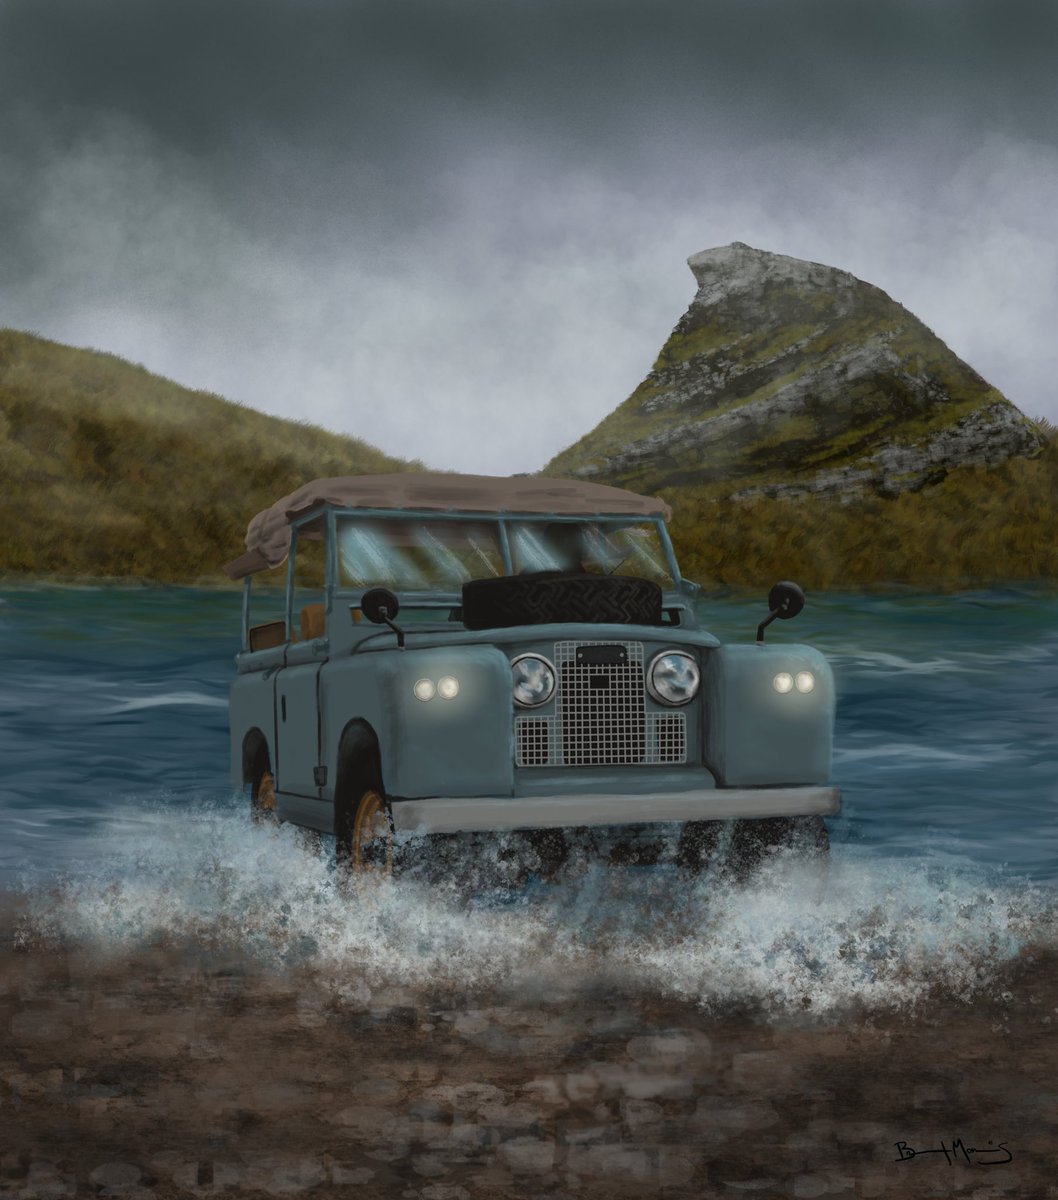 I’m not going to lie, I killed it with my latest vintage #LandRover painting. It’s doing a water crossing in the #Scottish Highlands. #art #seriesII #offroading #uk @LandRover_UK @LandRoverUSA  @LRPalmBeach @TheLandRoverClu @Apple #ipad 

instagram.com/reel/CJUE2OVjk…